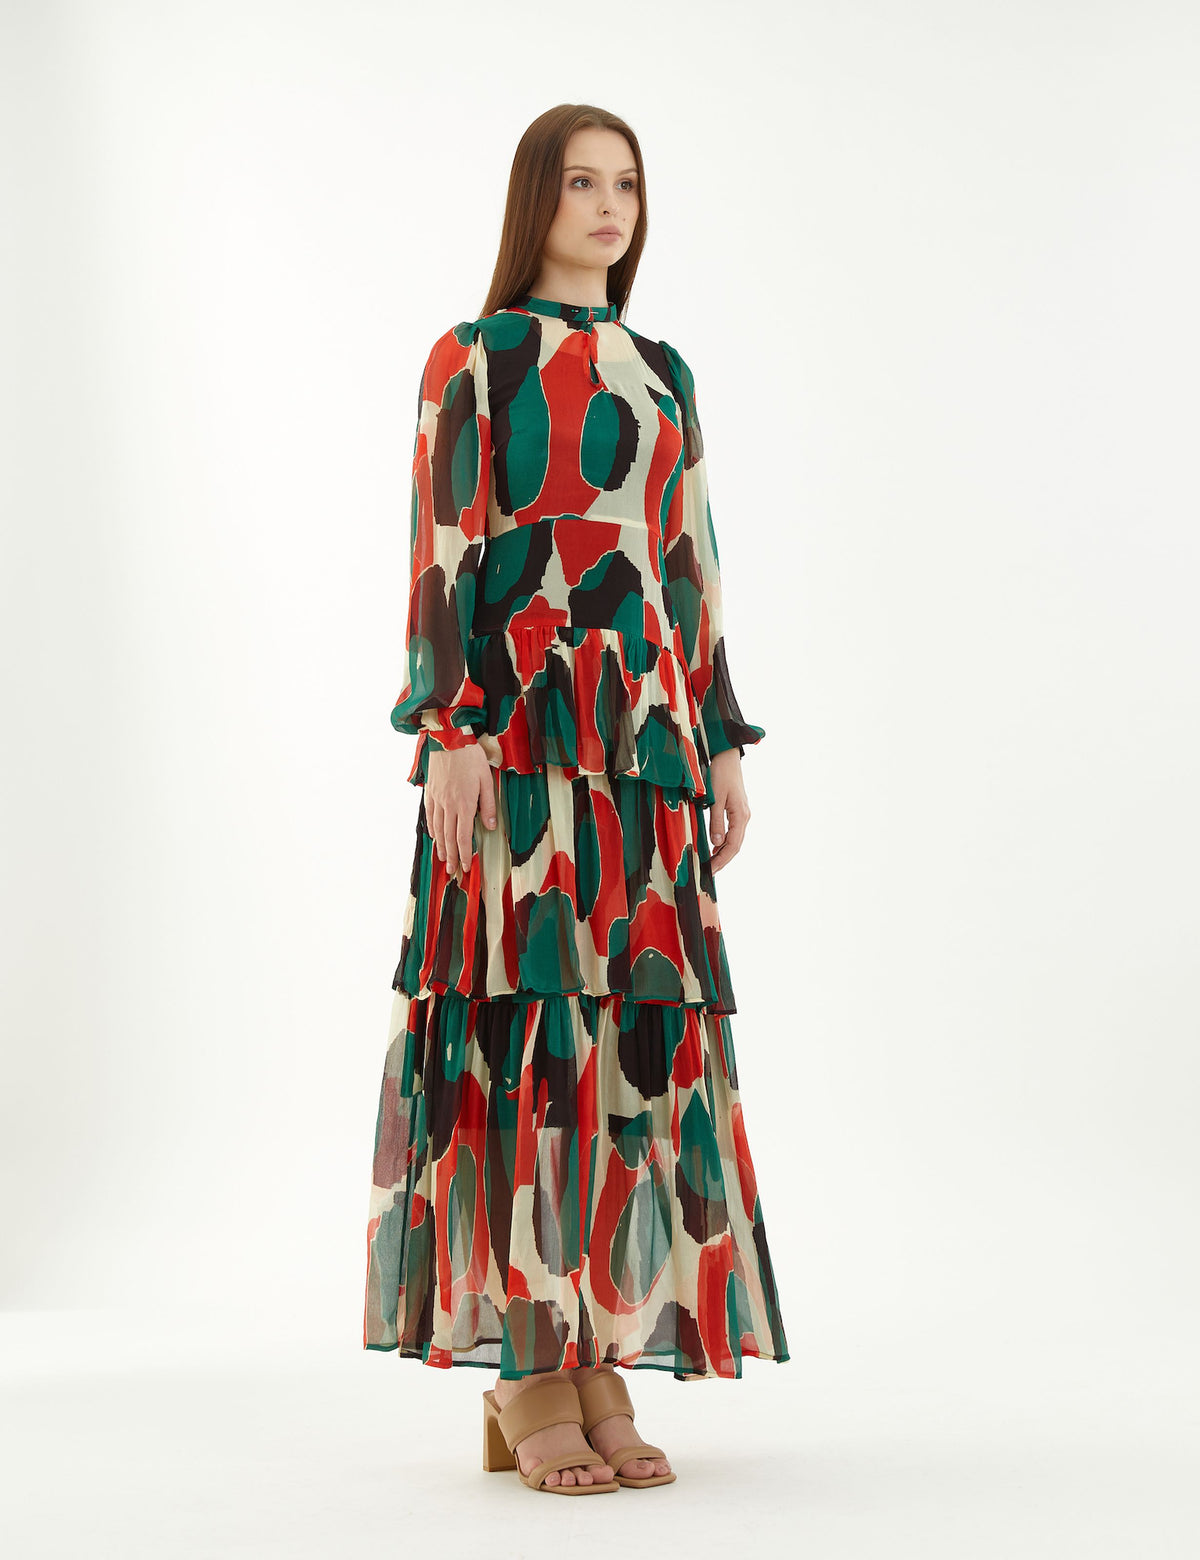 OFFWHITE, GREEN, BLACK AND RED ABSTRACT FRILL DRESS